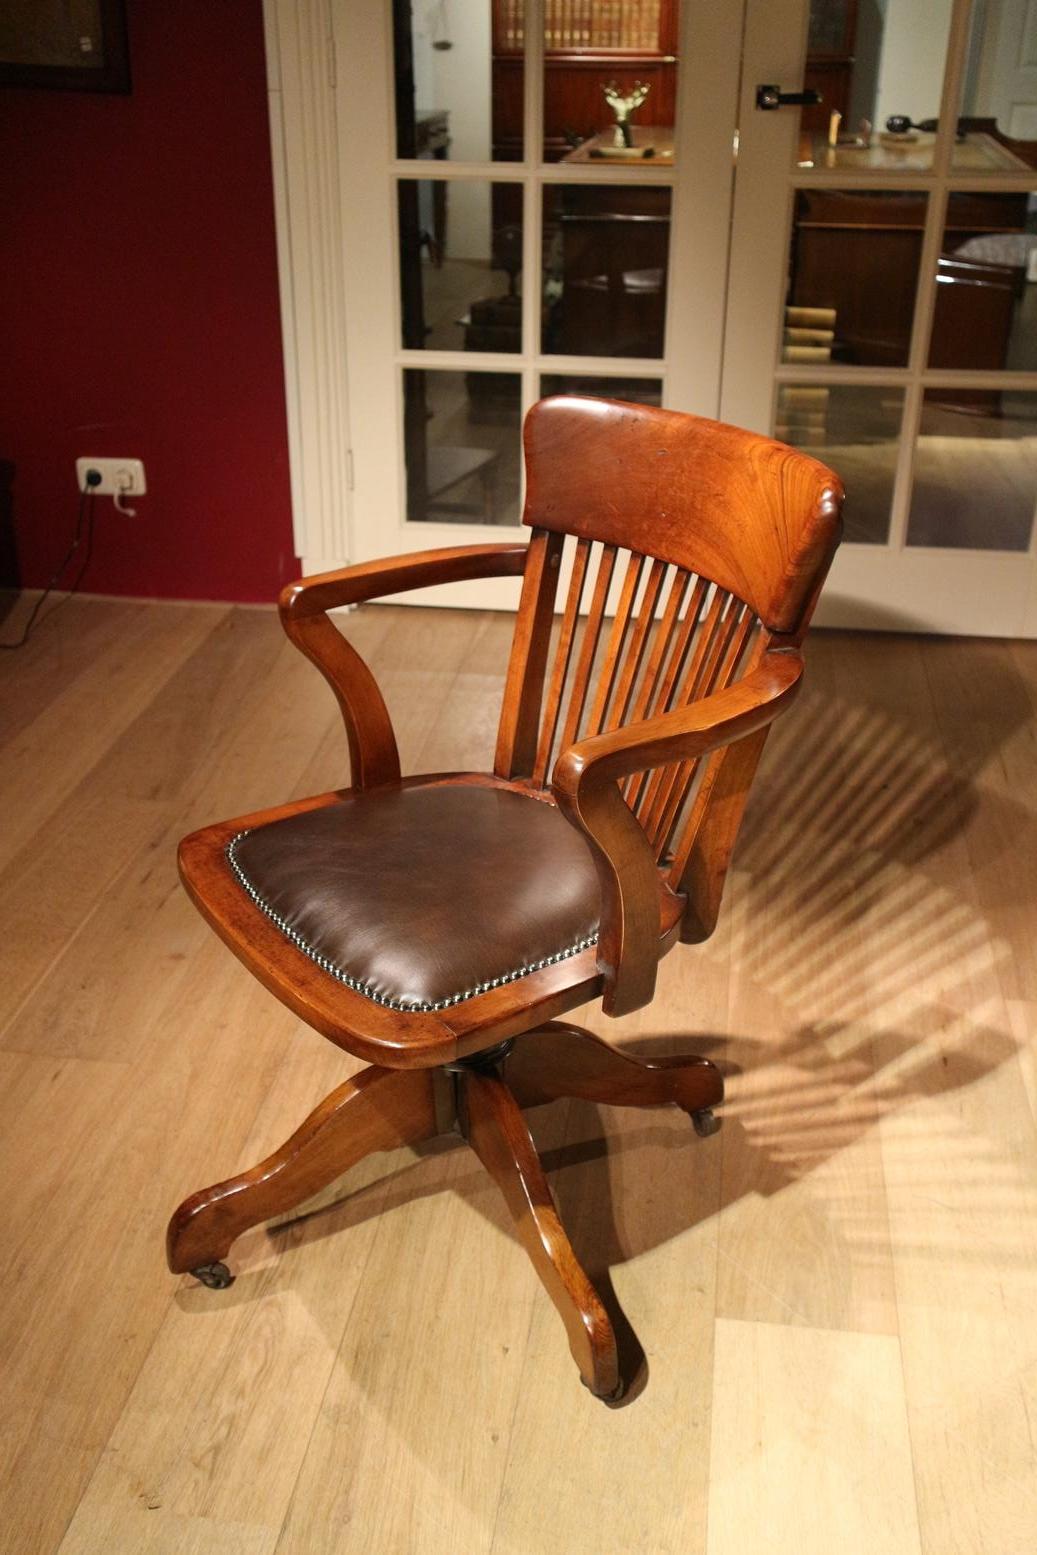 Antique mahogany office chair with new brown leather seat. Chair is in very good condition. Height adjustable and with adjustable swing mechanism. Stands on original iron wheels
Origin: England
Period: circa 1900.